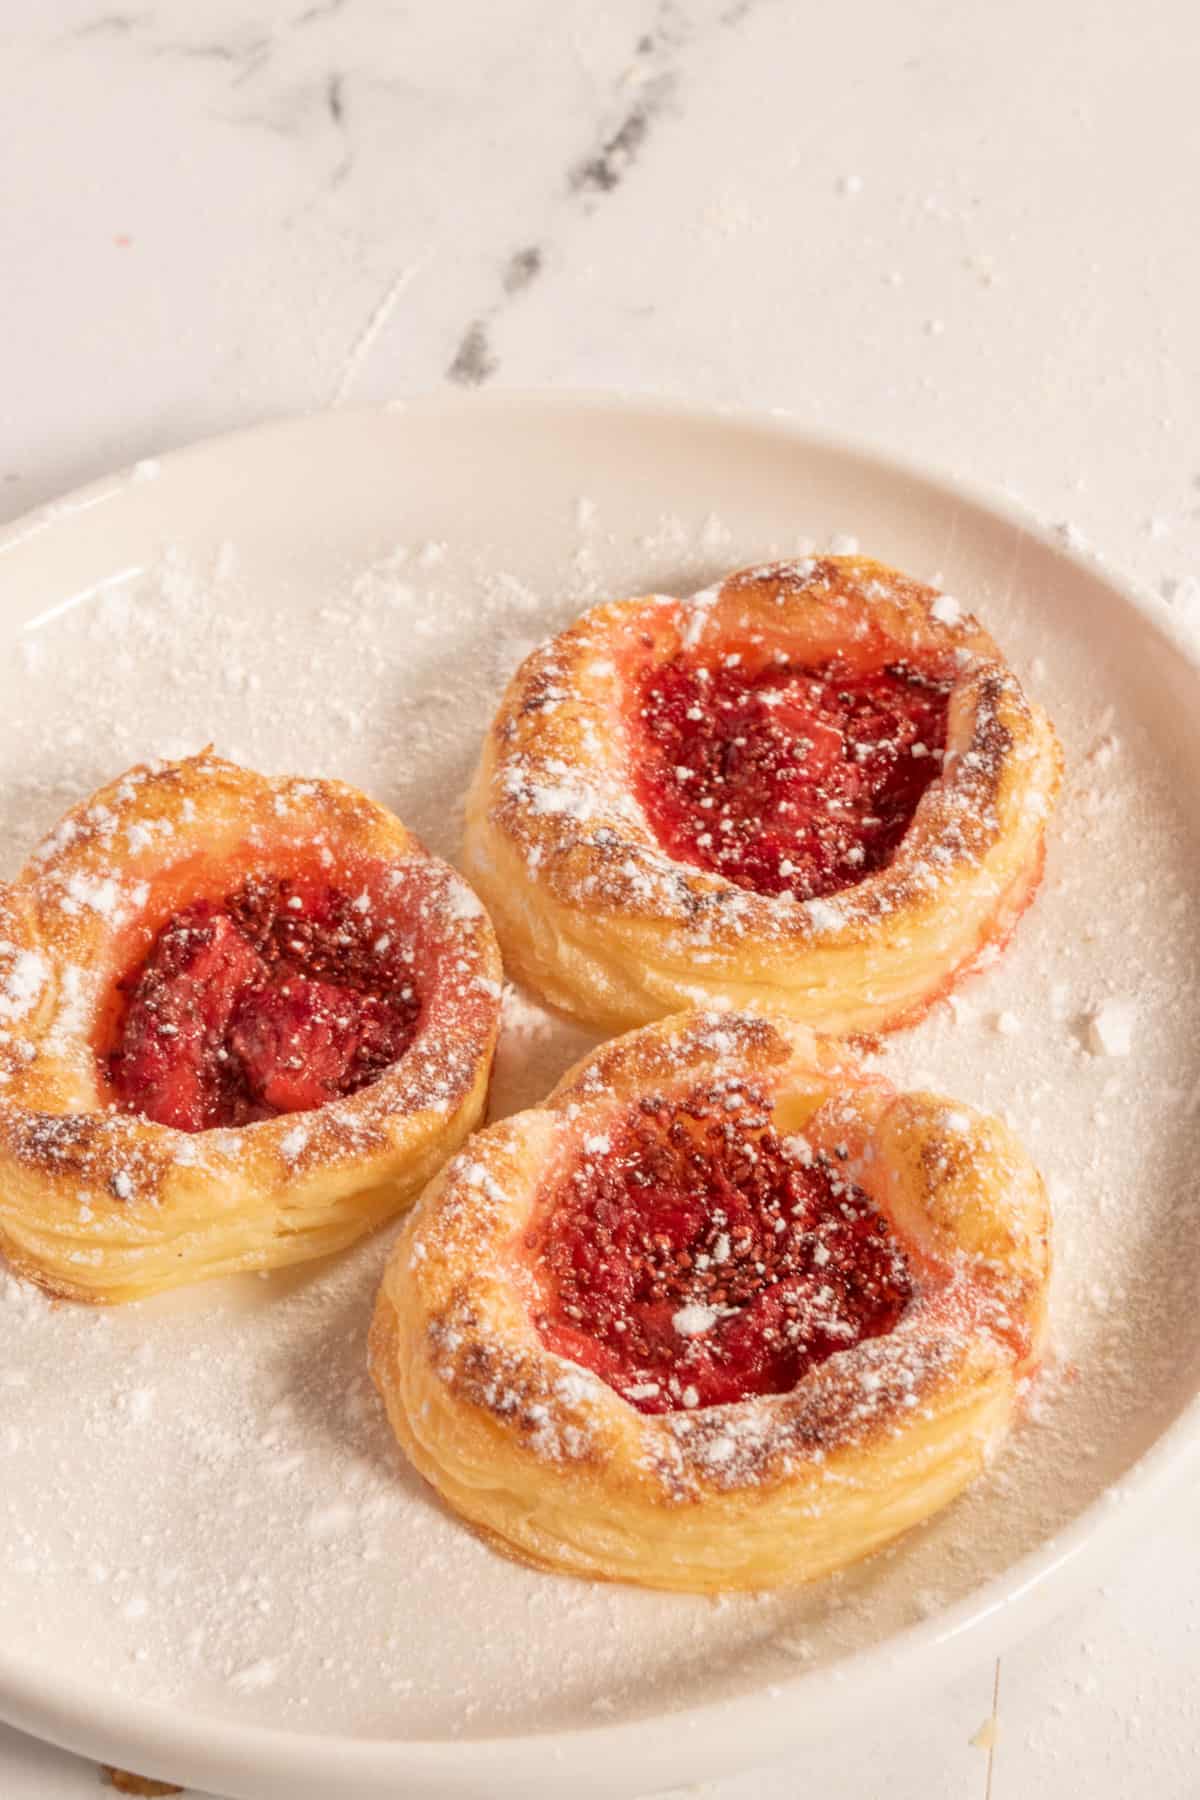 Three vegan Danish pastries on a small, white saucer, dusted with powdered sugar.